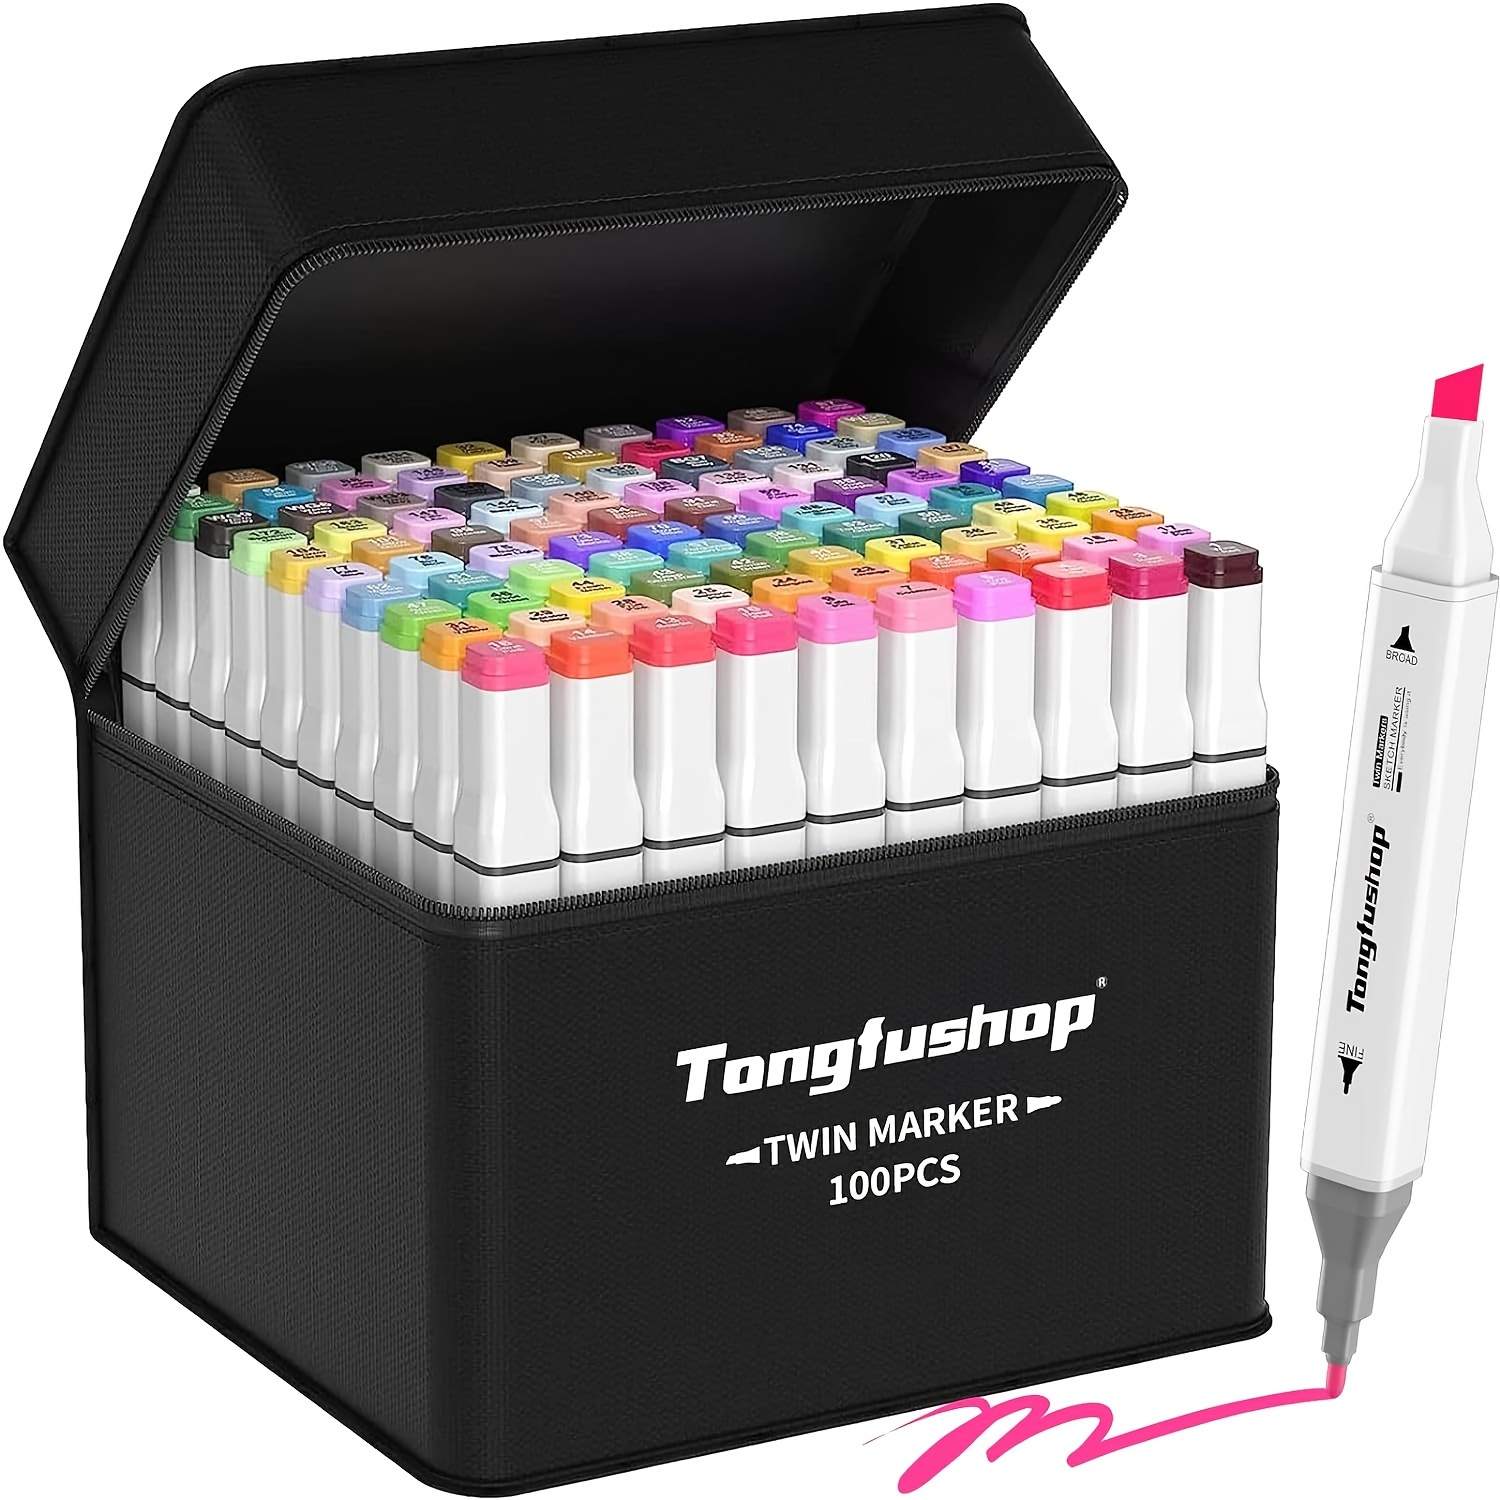 

Tongfushop 100 Colors Alcohol Markers, Double Tip Blender Art Drawing Markers Set, Professional Permanent Sketch Markers For Coloring Illustrations With Organizing Case, Pad